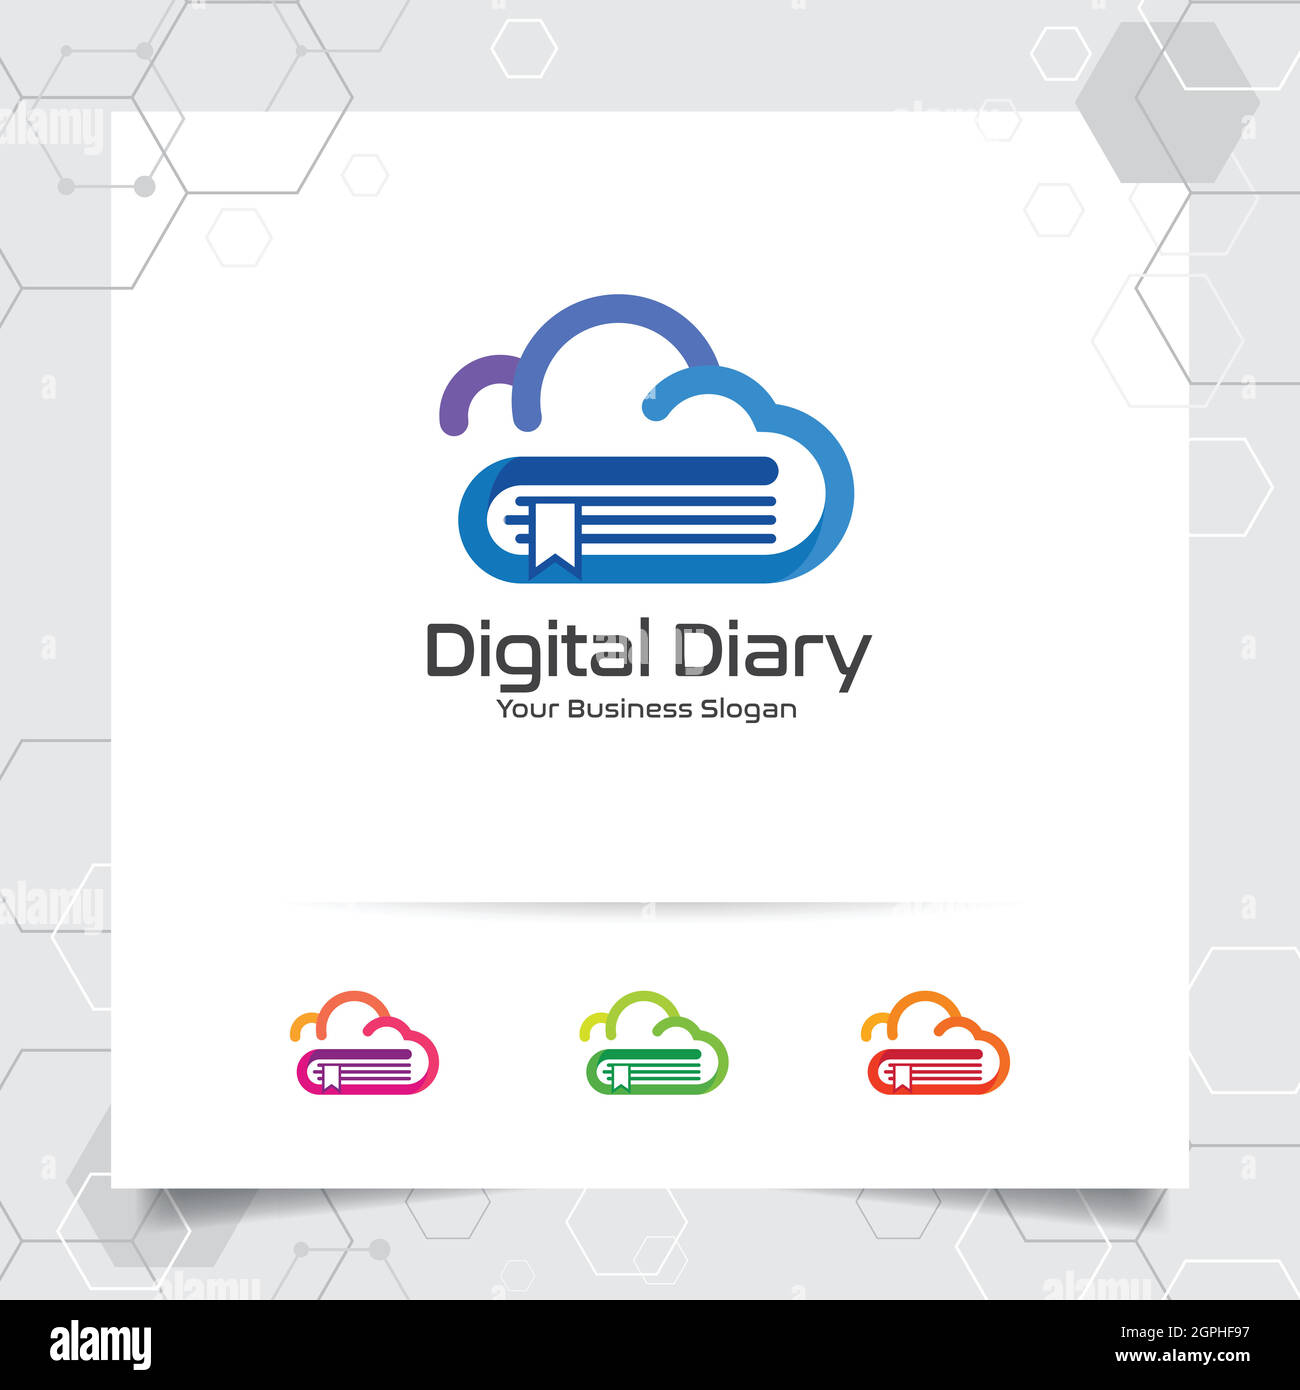 Book cloud logo vector design with concept of colorful cloud and notebook icon illustration for business, library, bookstore, education, and university. Stock Vector